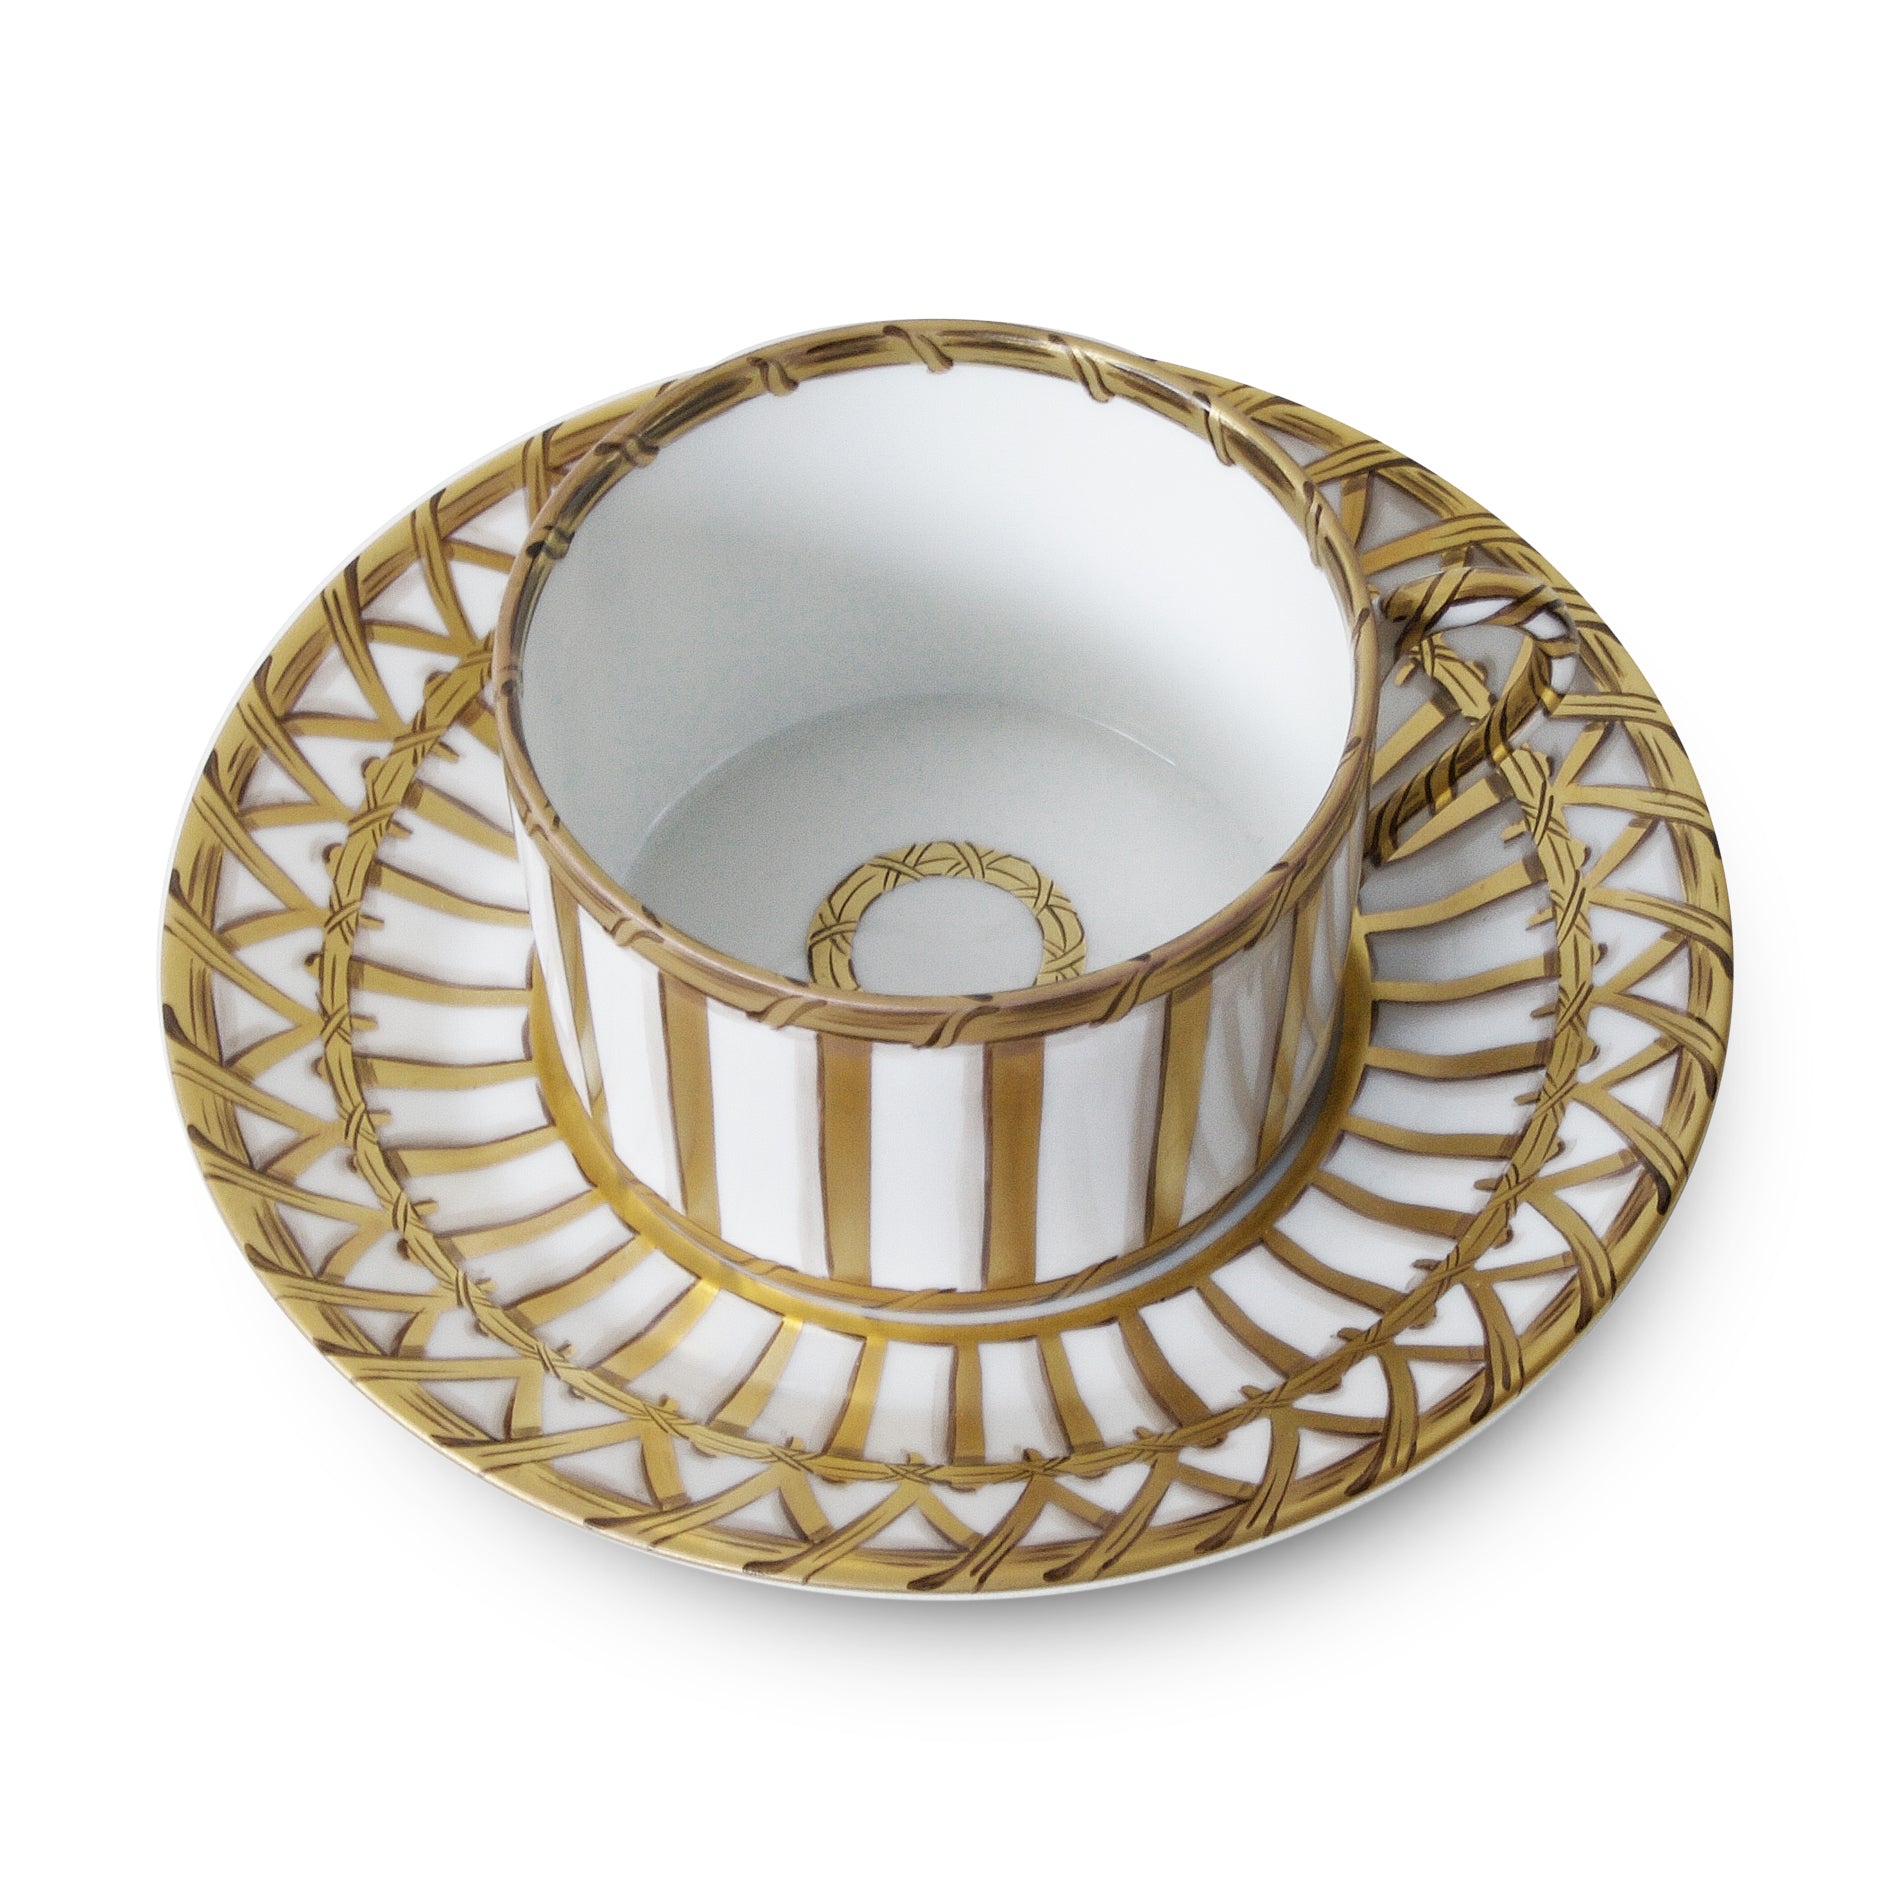 Vannerie - Tea cup and saucer
